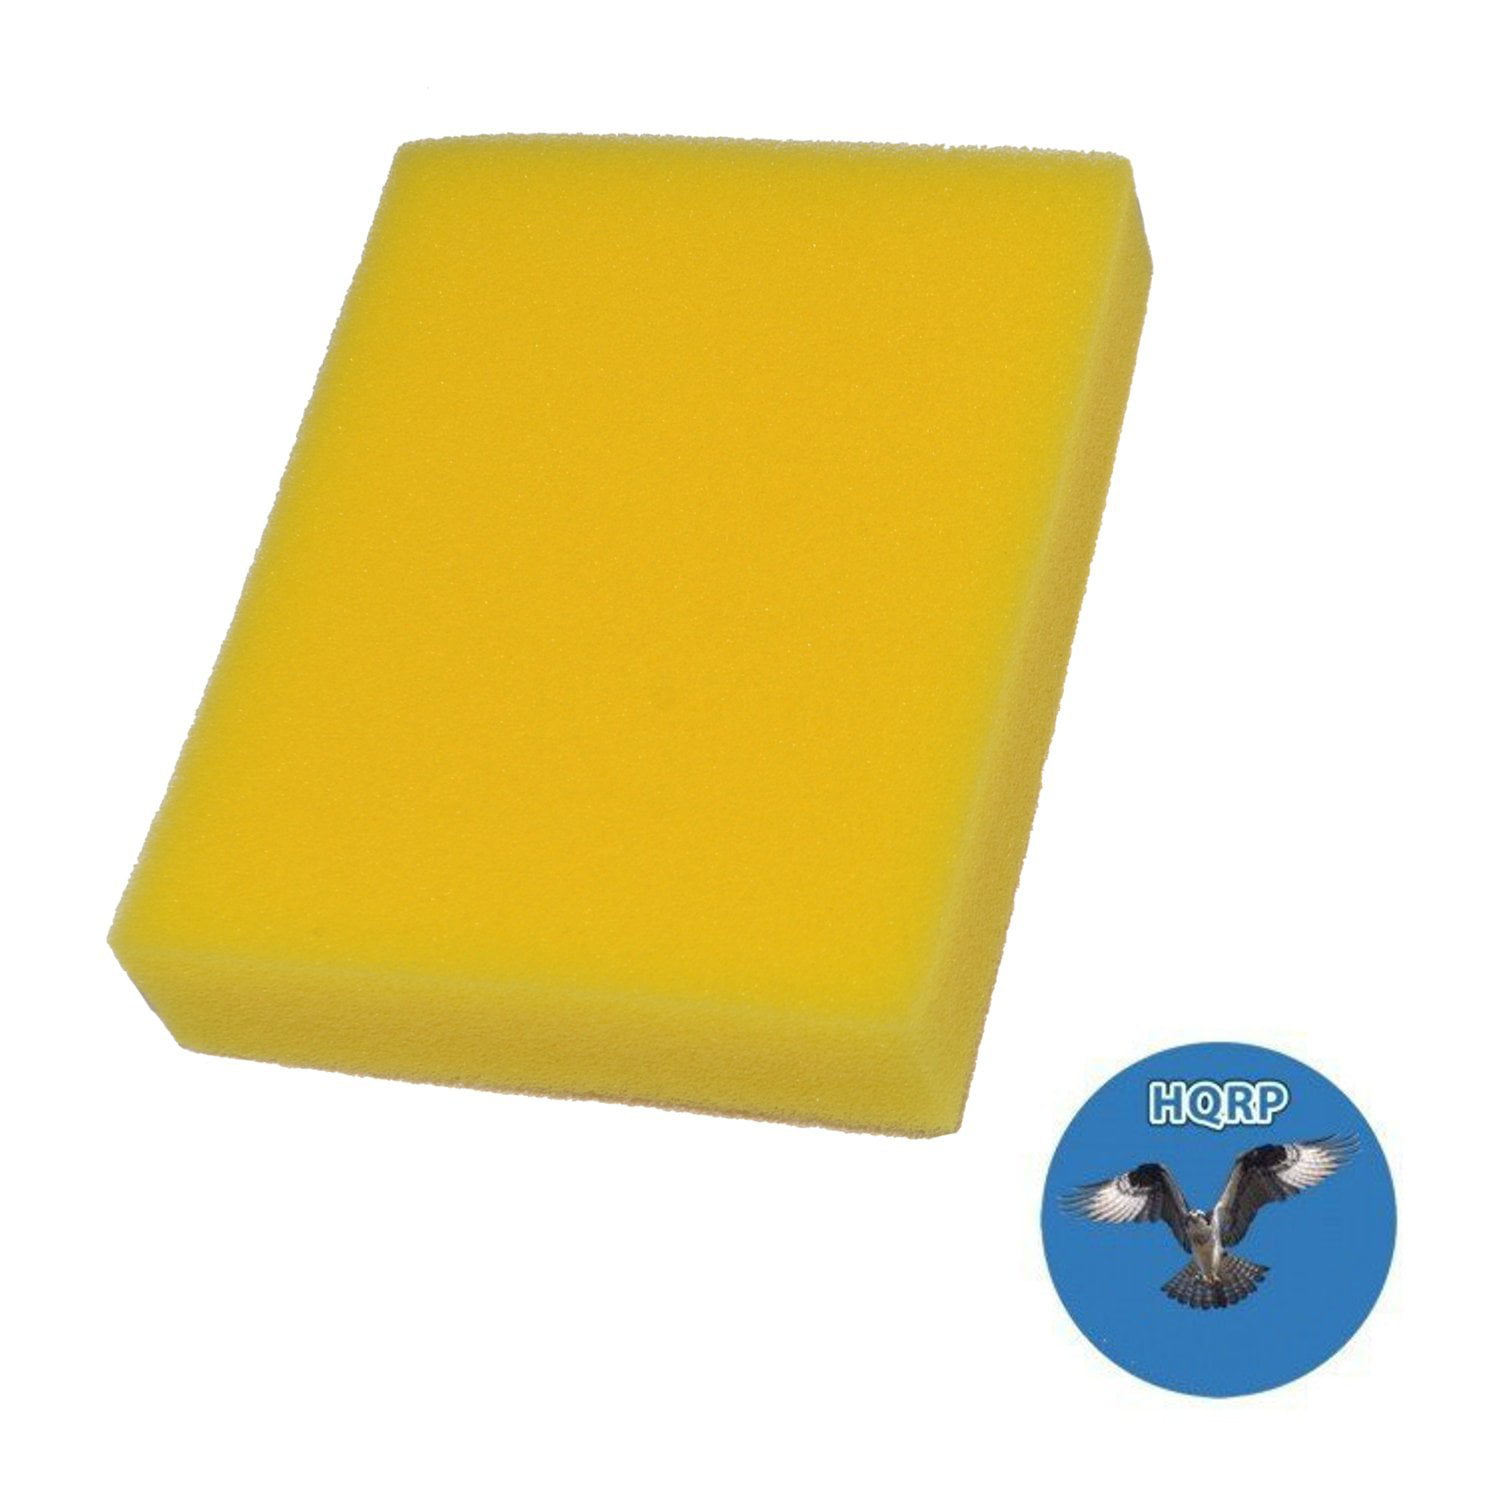 Bissell Foam Filter Yellow #1600304 